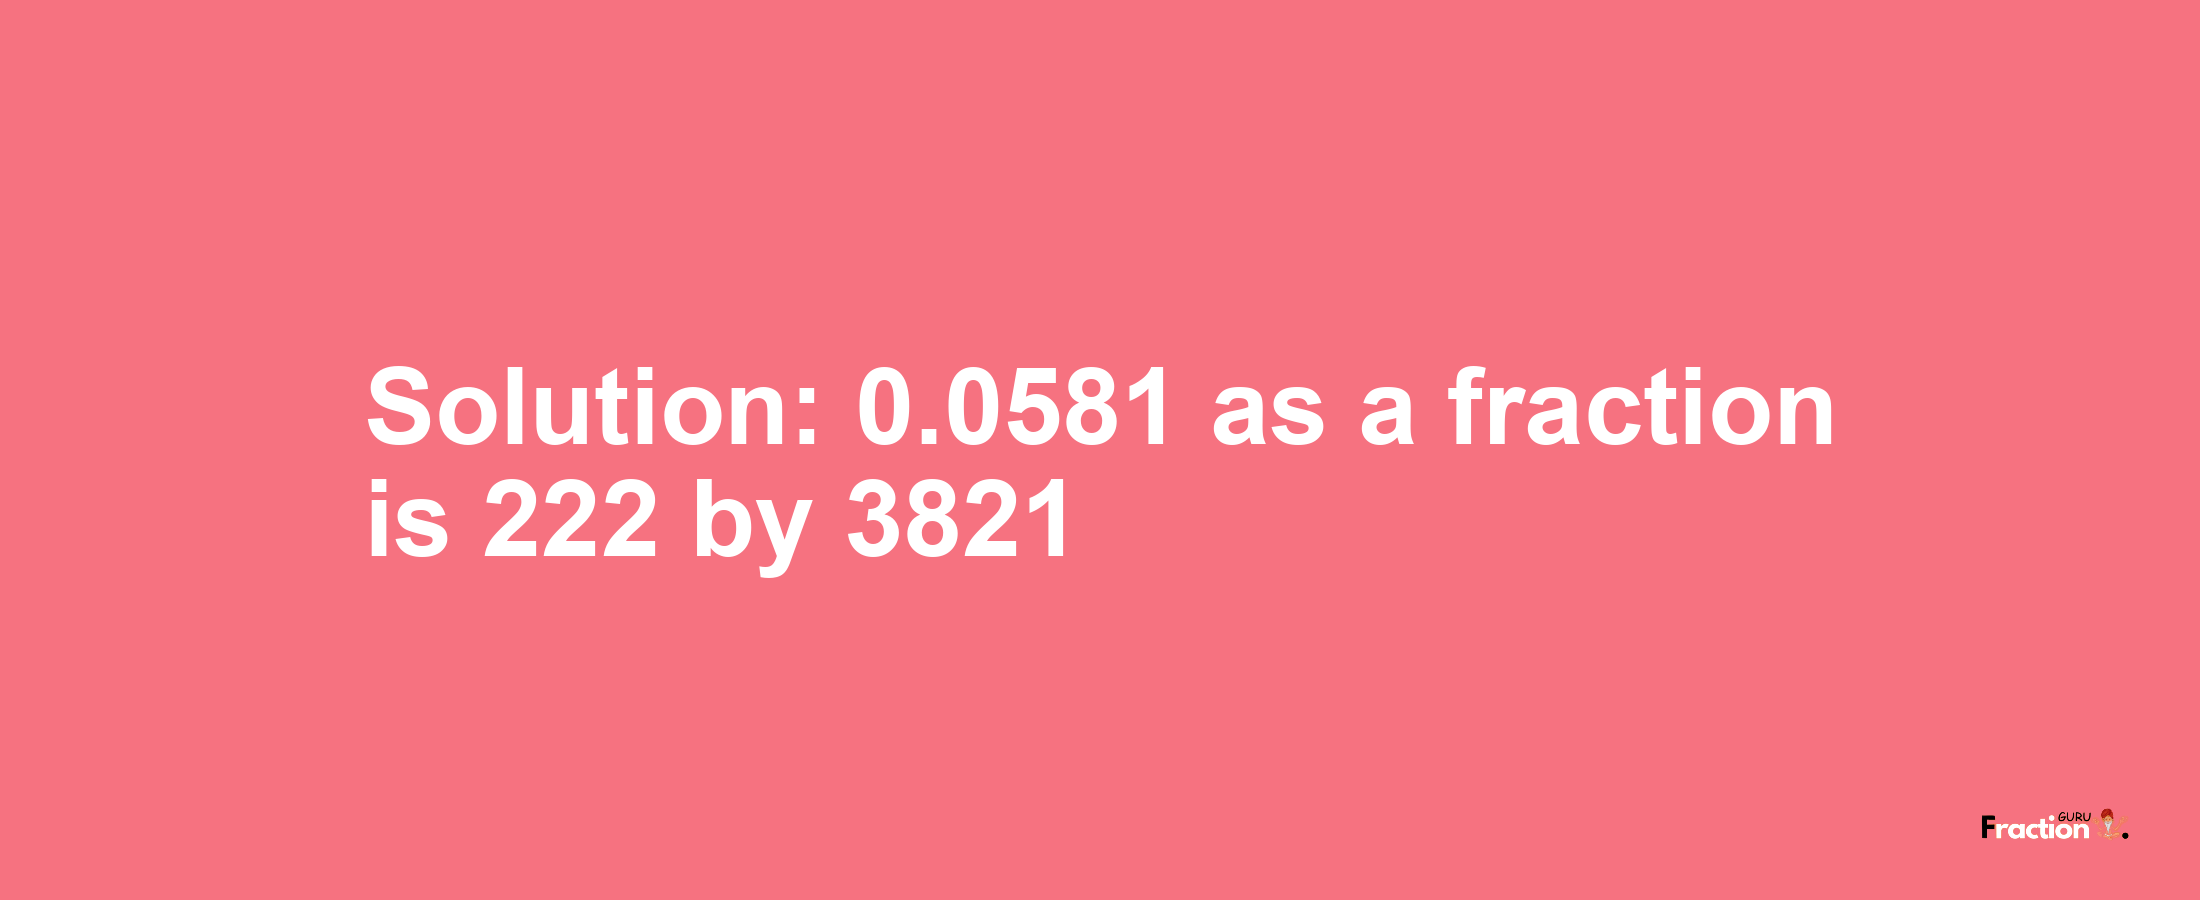 Solution:0.0581 as a fraction is 222/3821